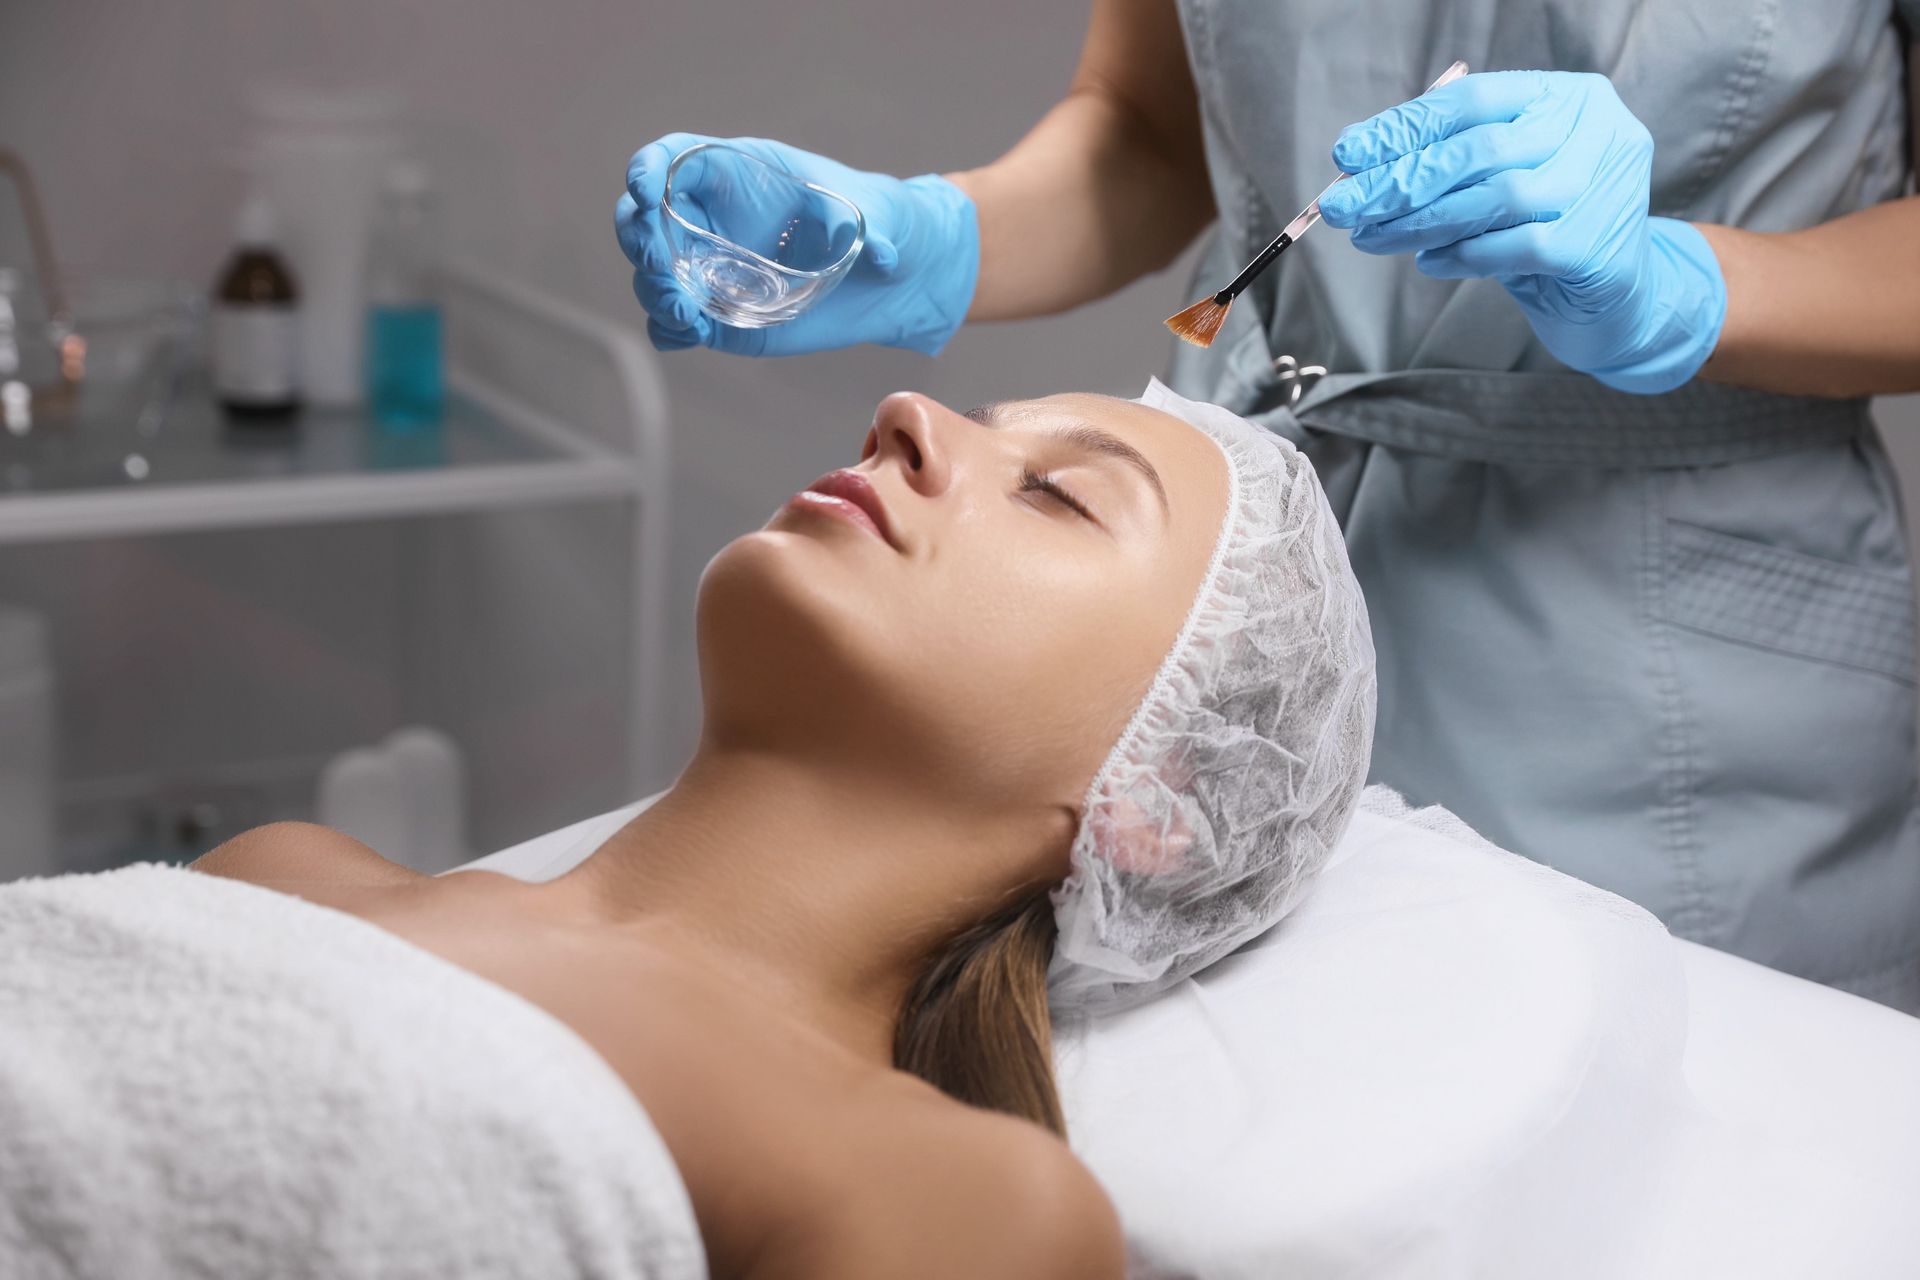 8 Amazing Chemical Peel Benefits You May Not Have Known